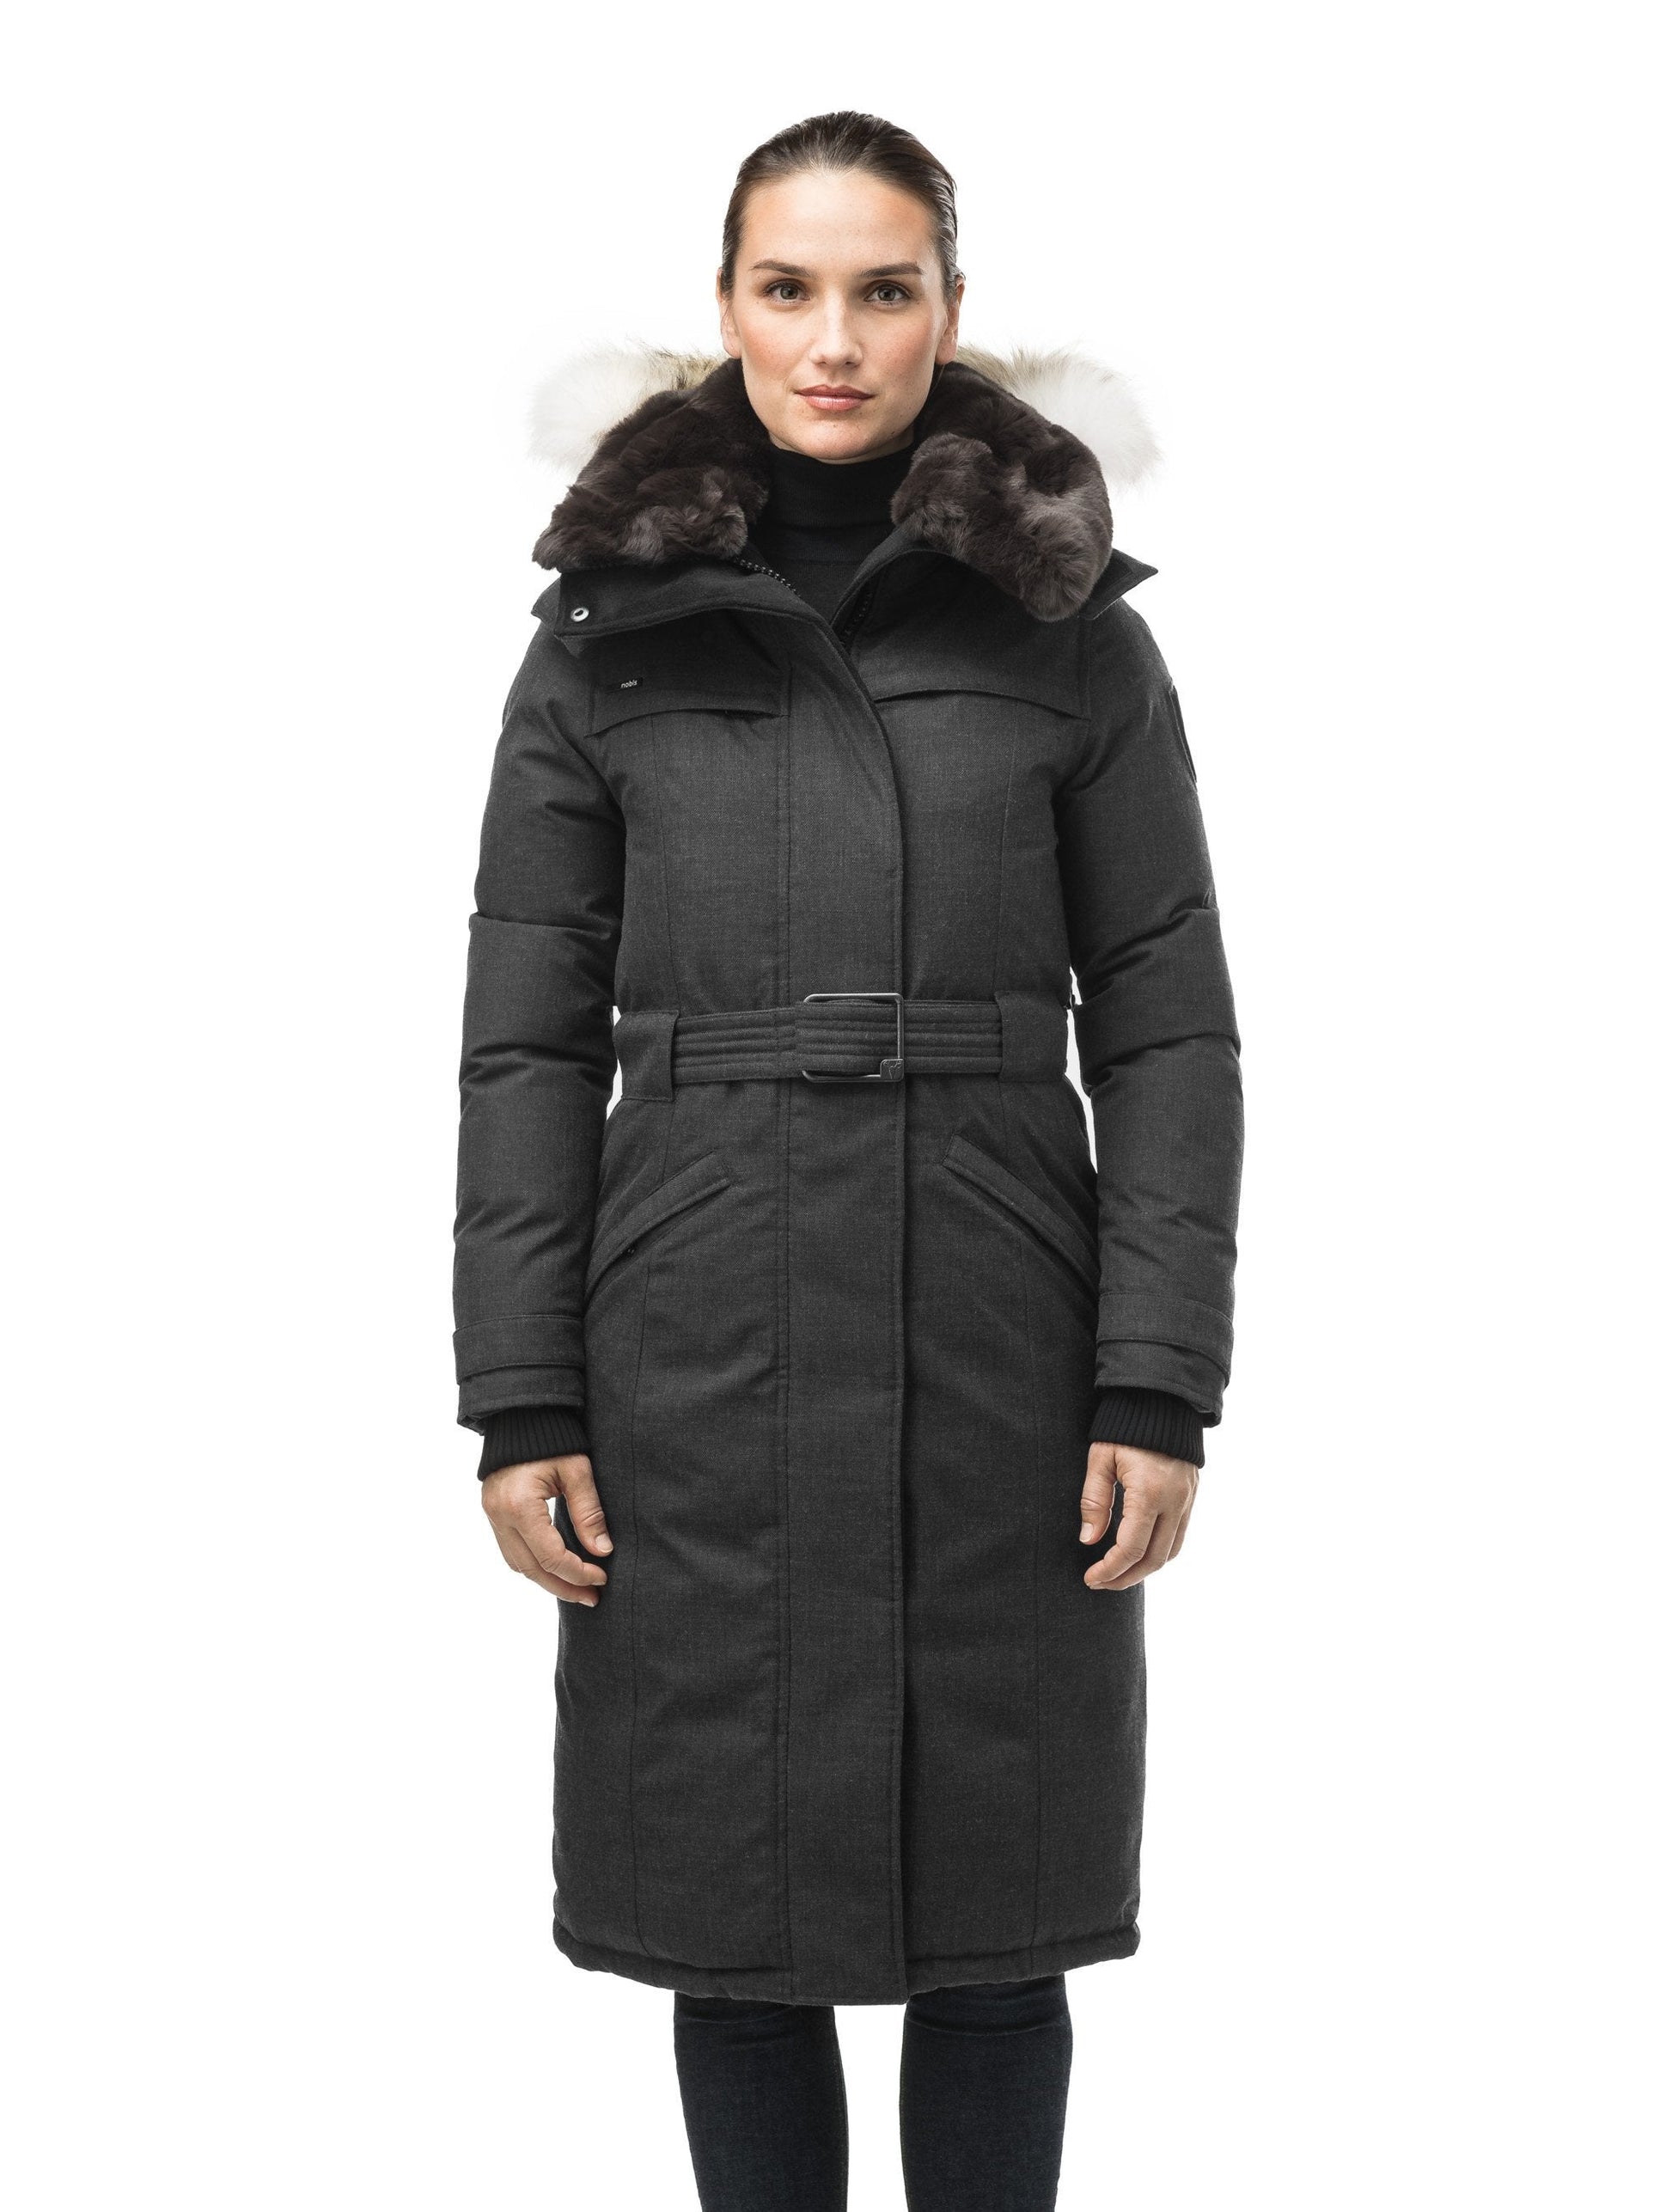 Women's knee length down filled parka with a belted waist and fully removable Coyote and Rex Rabbit fur ruffs in H. Black